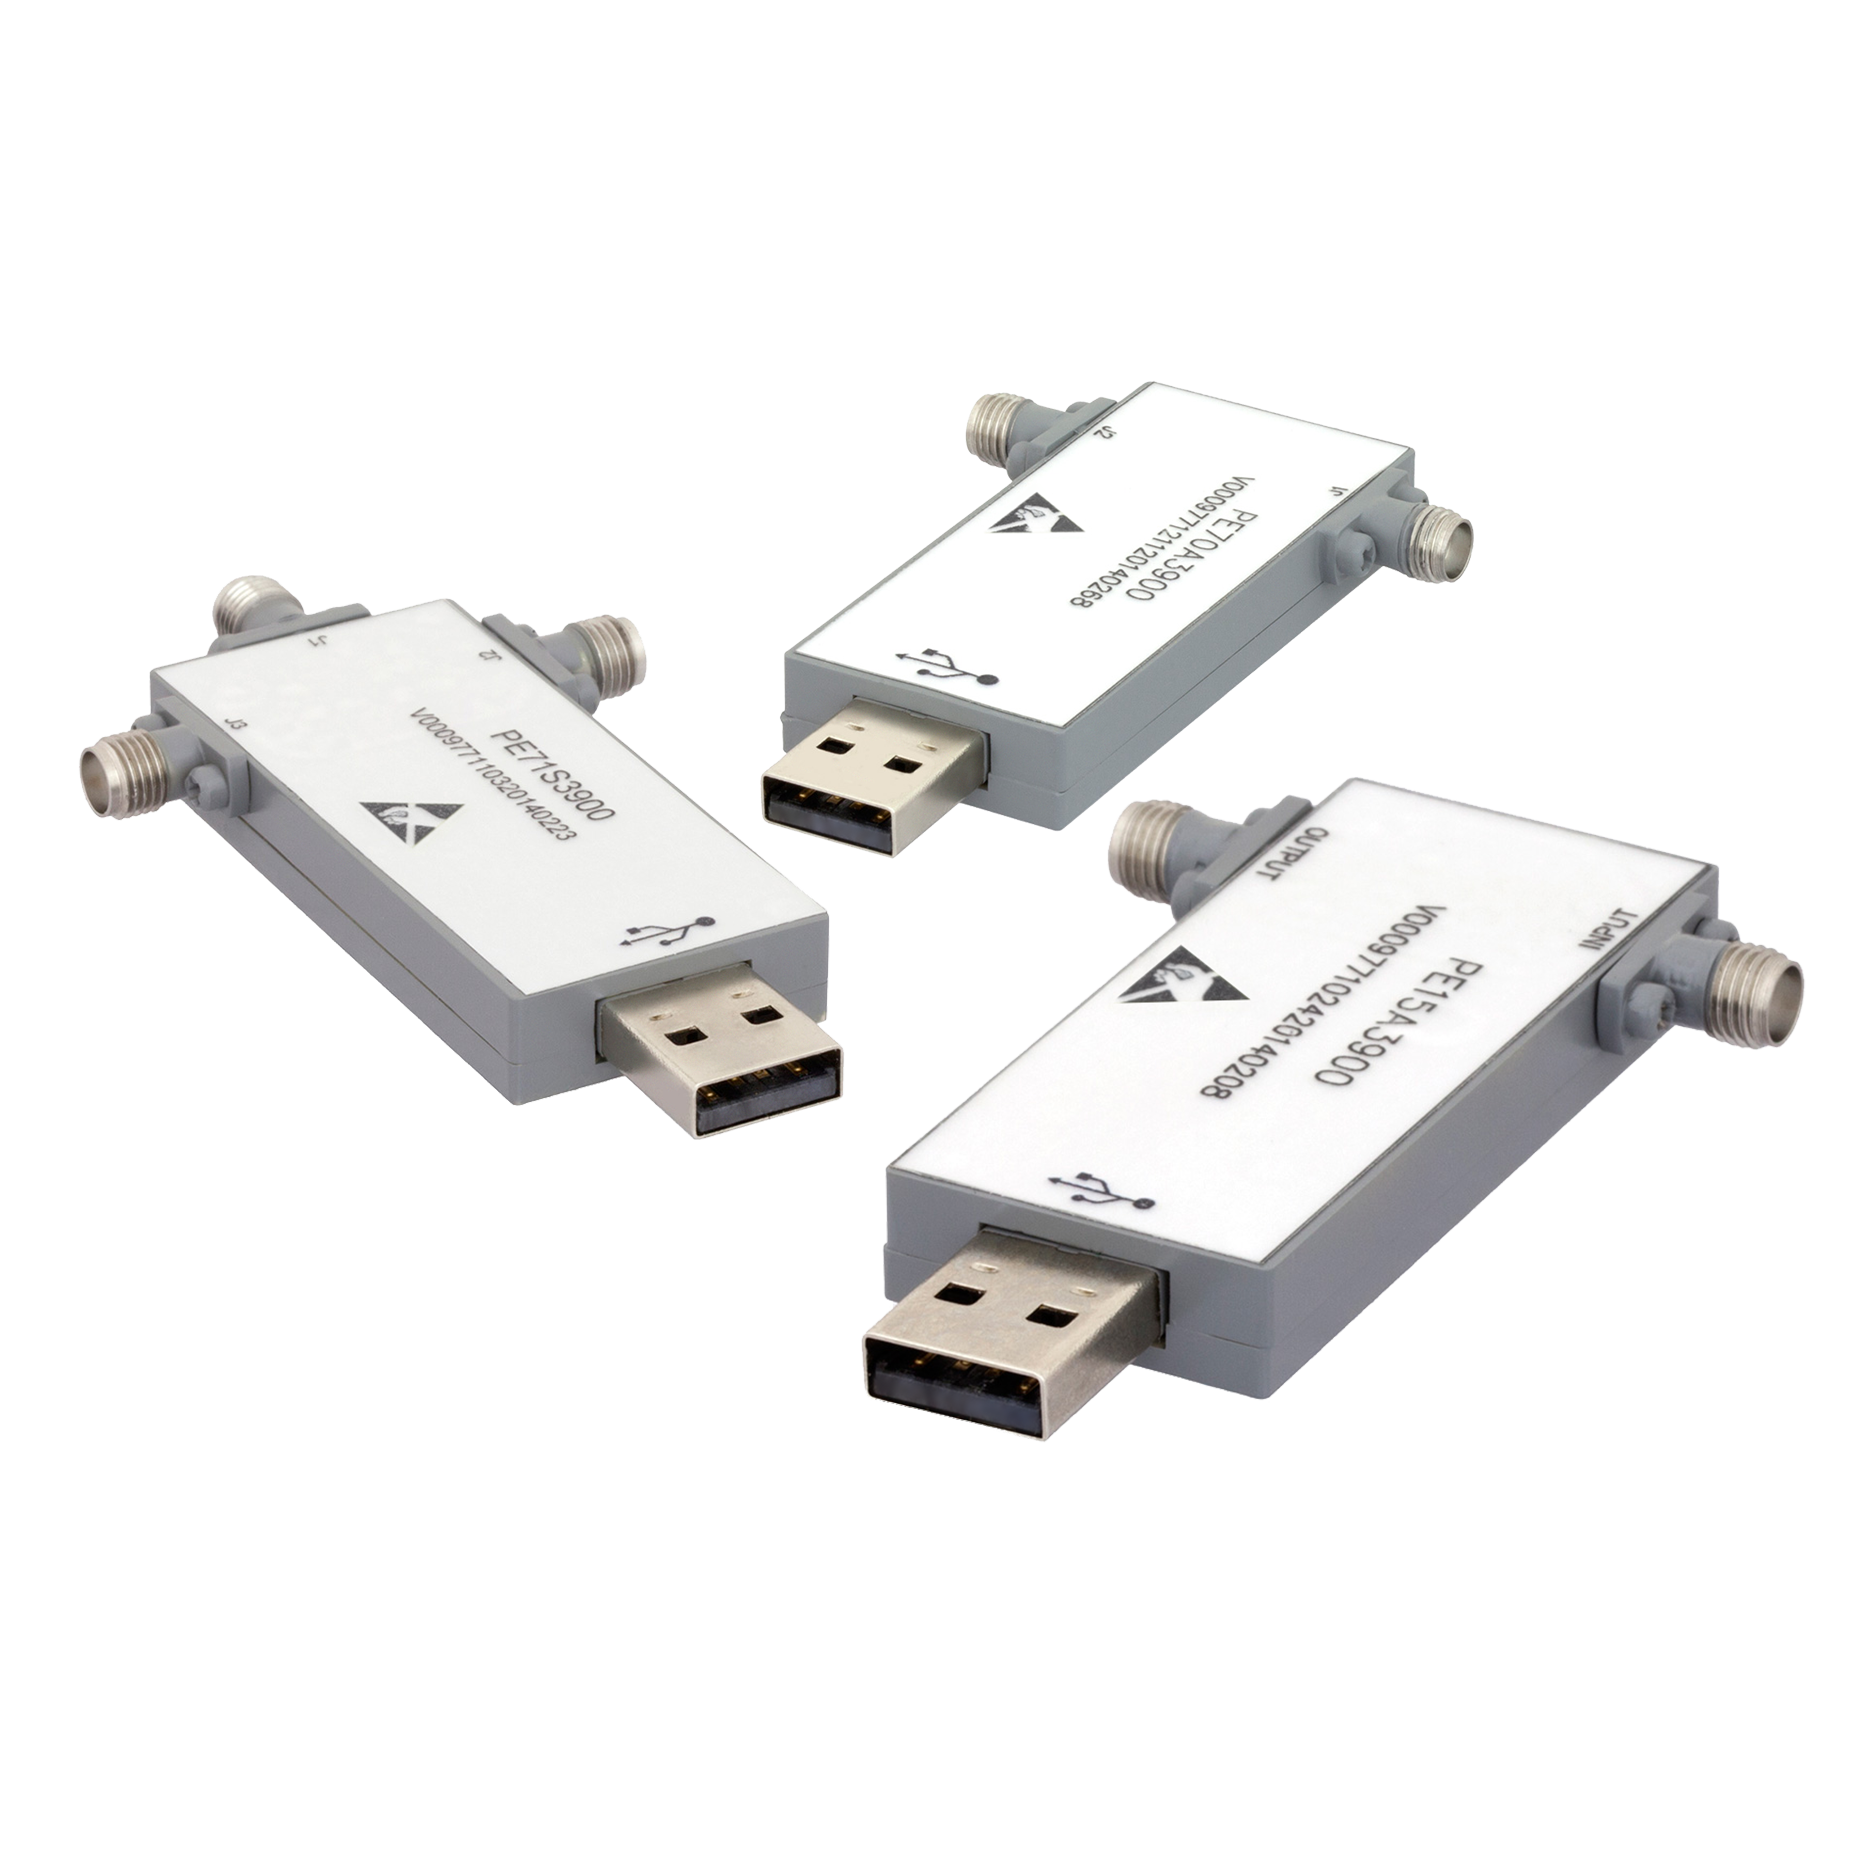 USB controlled Amplifiers, Attenuators and Switches